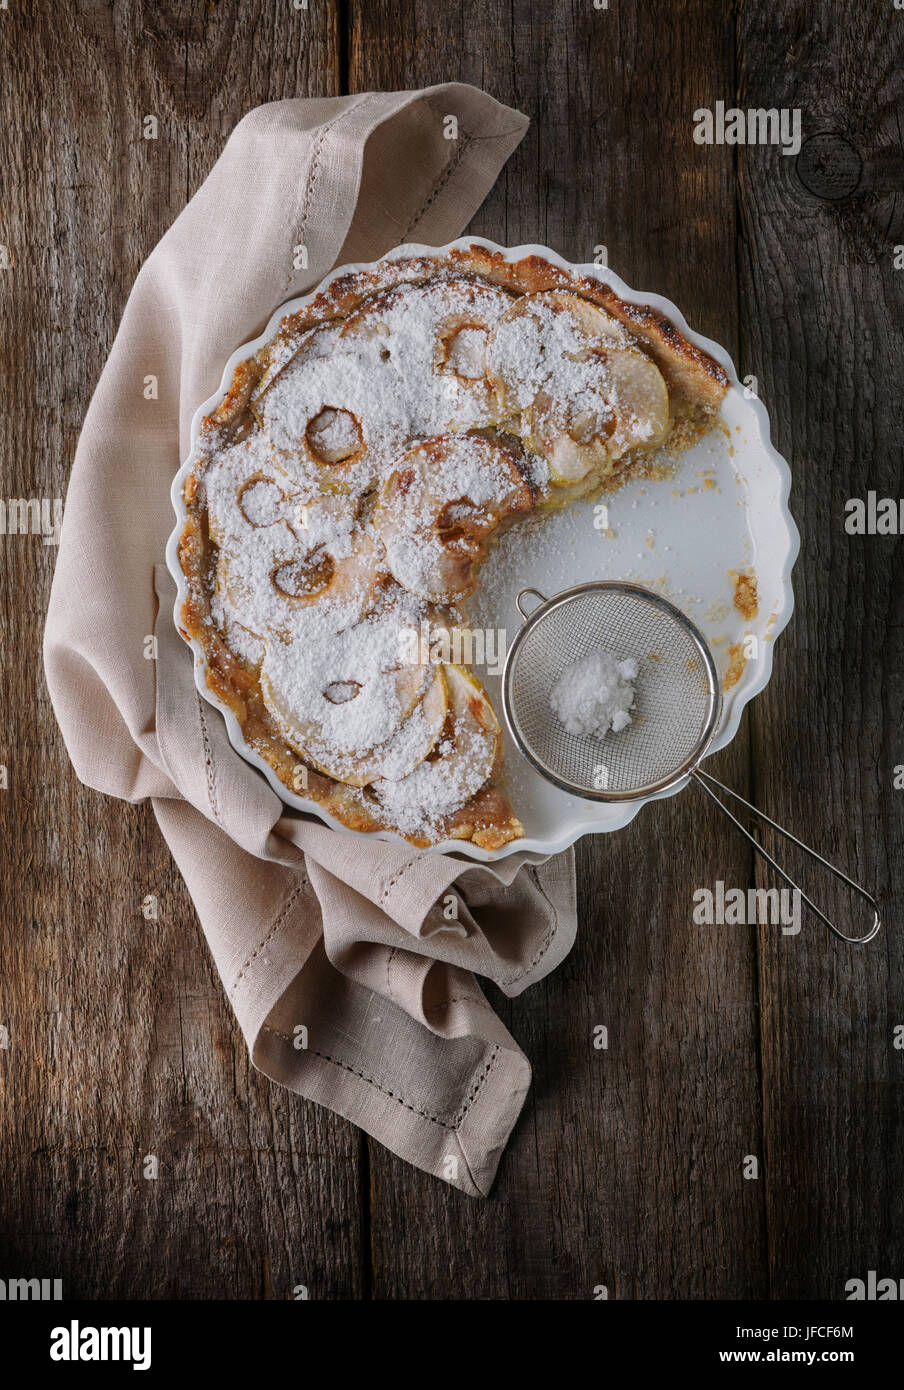 Apple pie and a napkin on wooden table. Stock Photo